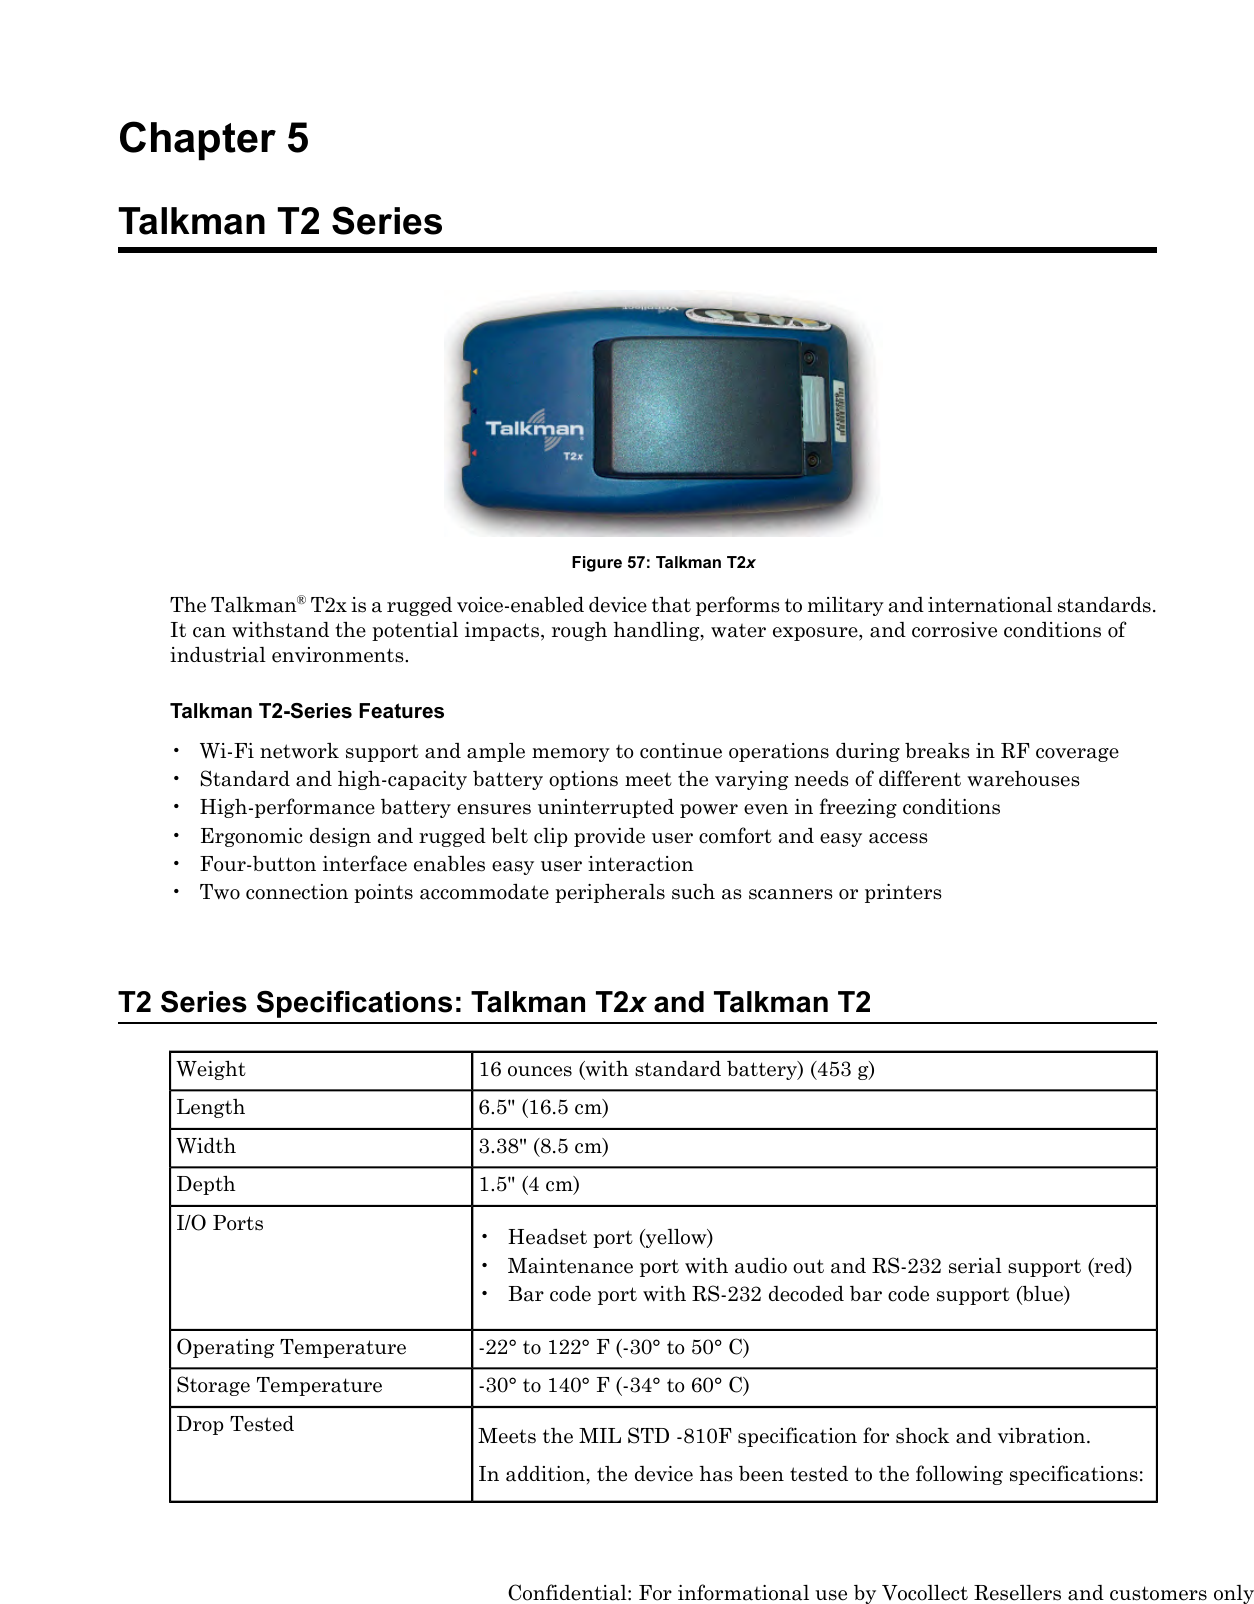 Chapter 5Talkman T2 SeriesFigure 57: Talkman T2xThe Talkman®T2x is a rugged voice-enabled device that performs to military and international standards.It can withstand the potential impacts, rough handling, water exposure, and corrosive conditions ofindustrial environments.Talkman T2-Series Features• Wi-Fi network support and ample memory to continue operations during breaks in RF coverage• Standard and high-capacity battery options meet the varying needs of different warehouses• High-performance battery ensures uninterrupted power even in freezing conditions• Ergonomic design and rugged belt clip provide user comfort and easy access• Four-button interface enables easy user interaction• Two connection points accommodate peripherals such as scanners or printersT2 Series Specifications: Talkman T2xand Talkman T216 ounces (with standard battery) (453 g)Weight6.5&quot; (16.5 cm)Length3.38&quot; (8.5 cm)Width1.5&quot; (4 cm)DepthI/O Ports • Headset port (yellow)• Maintenance port with audio out and RS-232 serial support (red)• Bar code port with RS-232 decoded bar code support (blue)-22° to 122° F (-30° to 50° C)Operating Temperature-30° to 140° F (-34° to 60° C)Storage TemperatureMeets the MIL STD -810F specification for shock and vibration.Drop TestedIn addition, the device has been tested to the following specifications:Confidential: For informational use by Vocollect Resellers and customers only